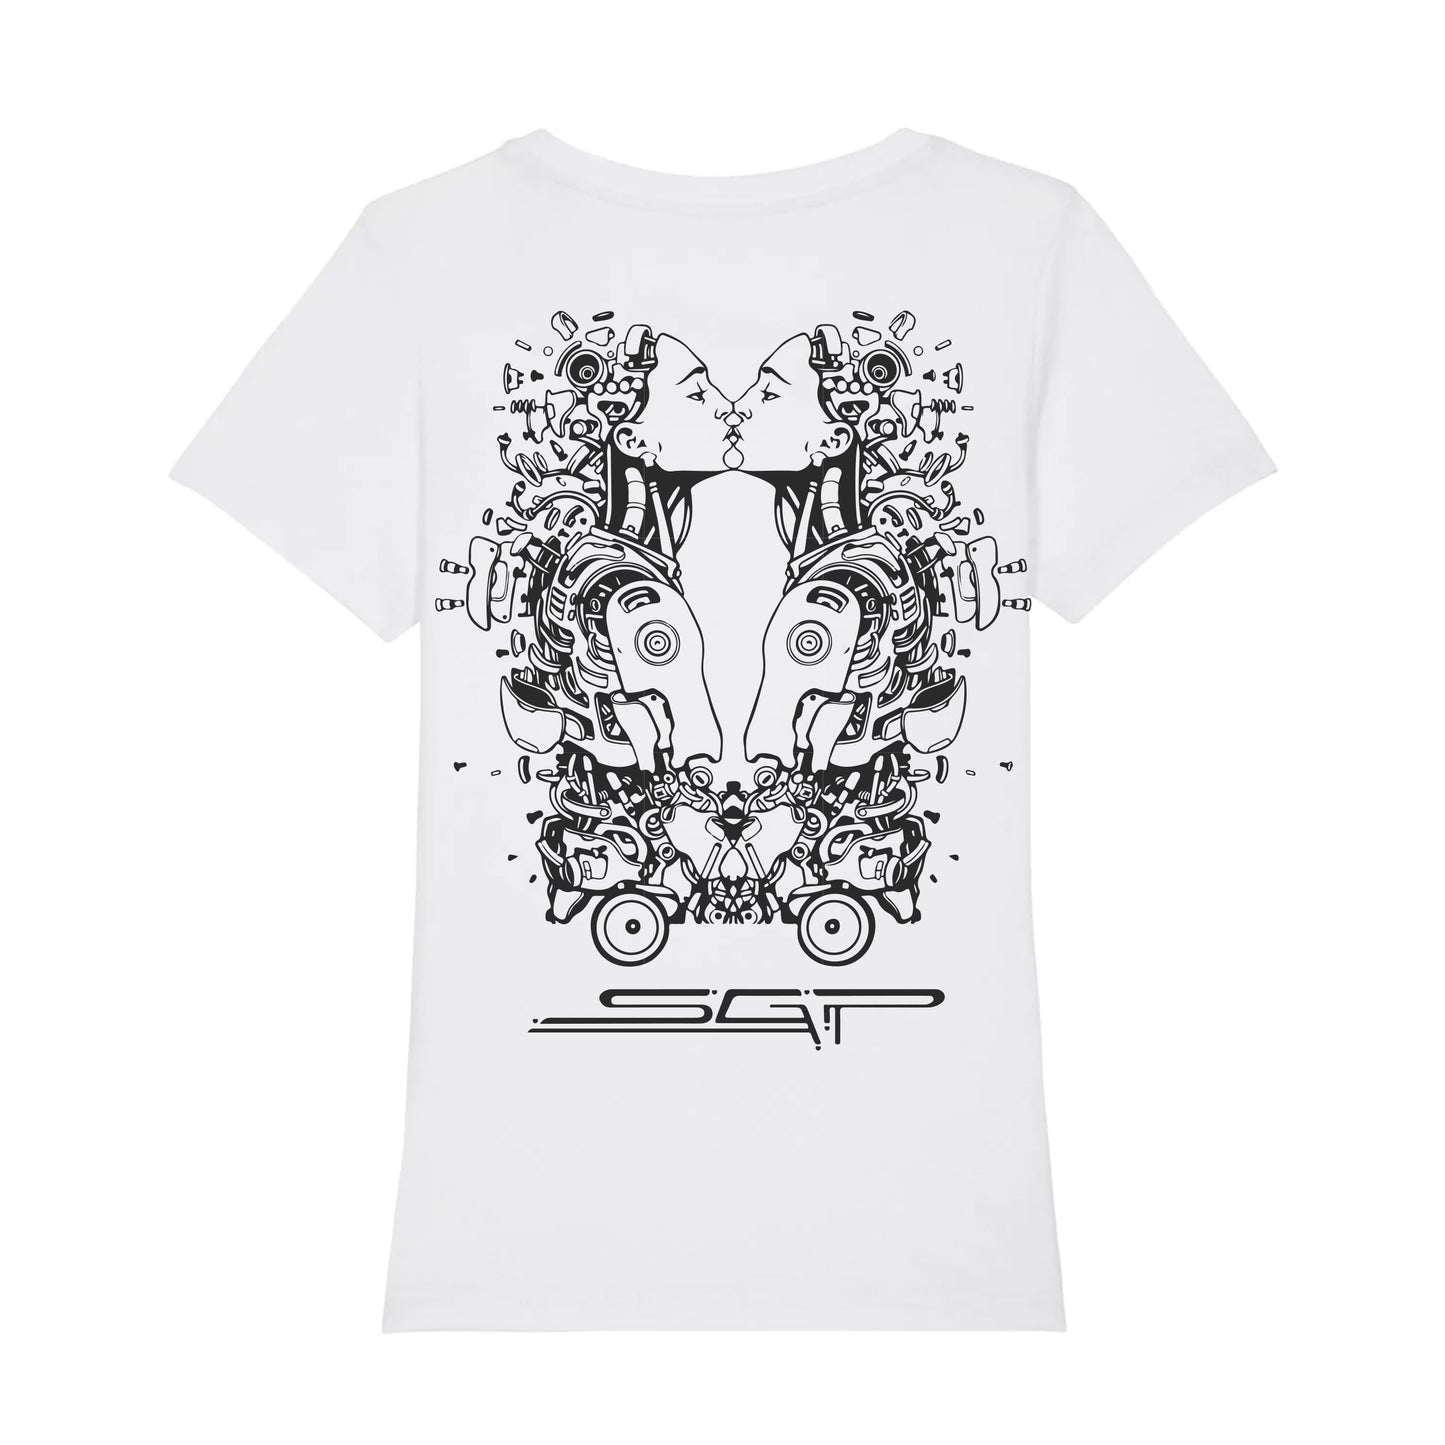 Secret Garden Party x Play Attention - Kissing Robots T-Shirt (White / Fitted T-Shirt)